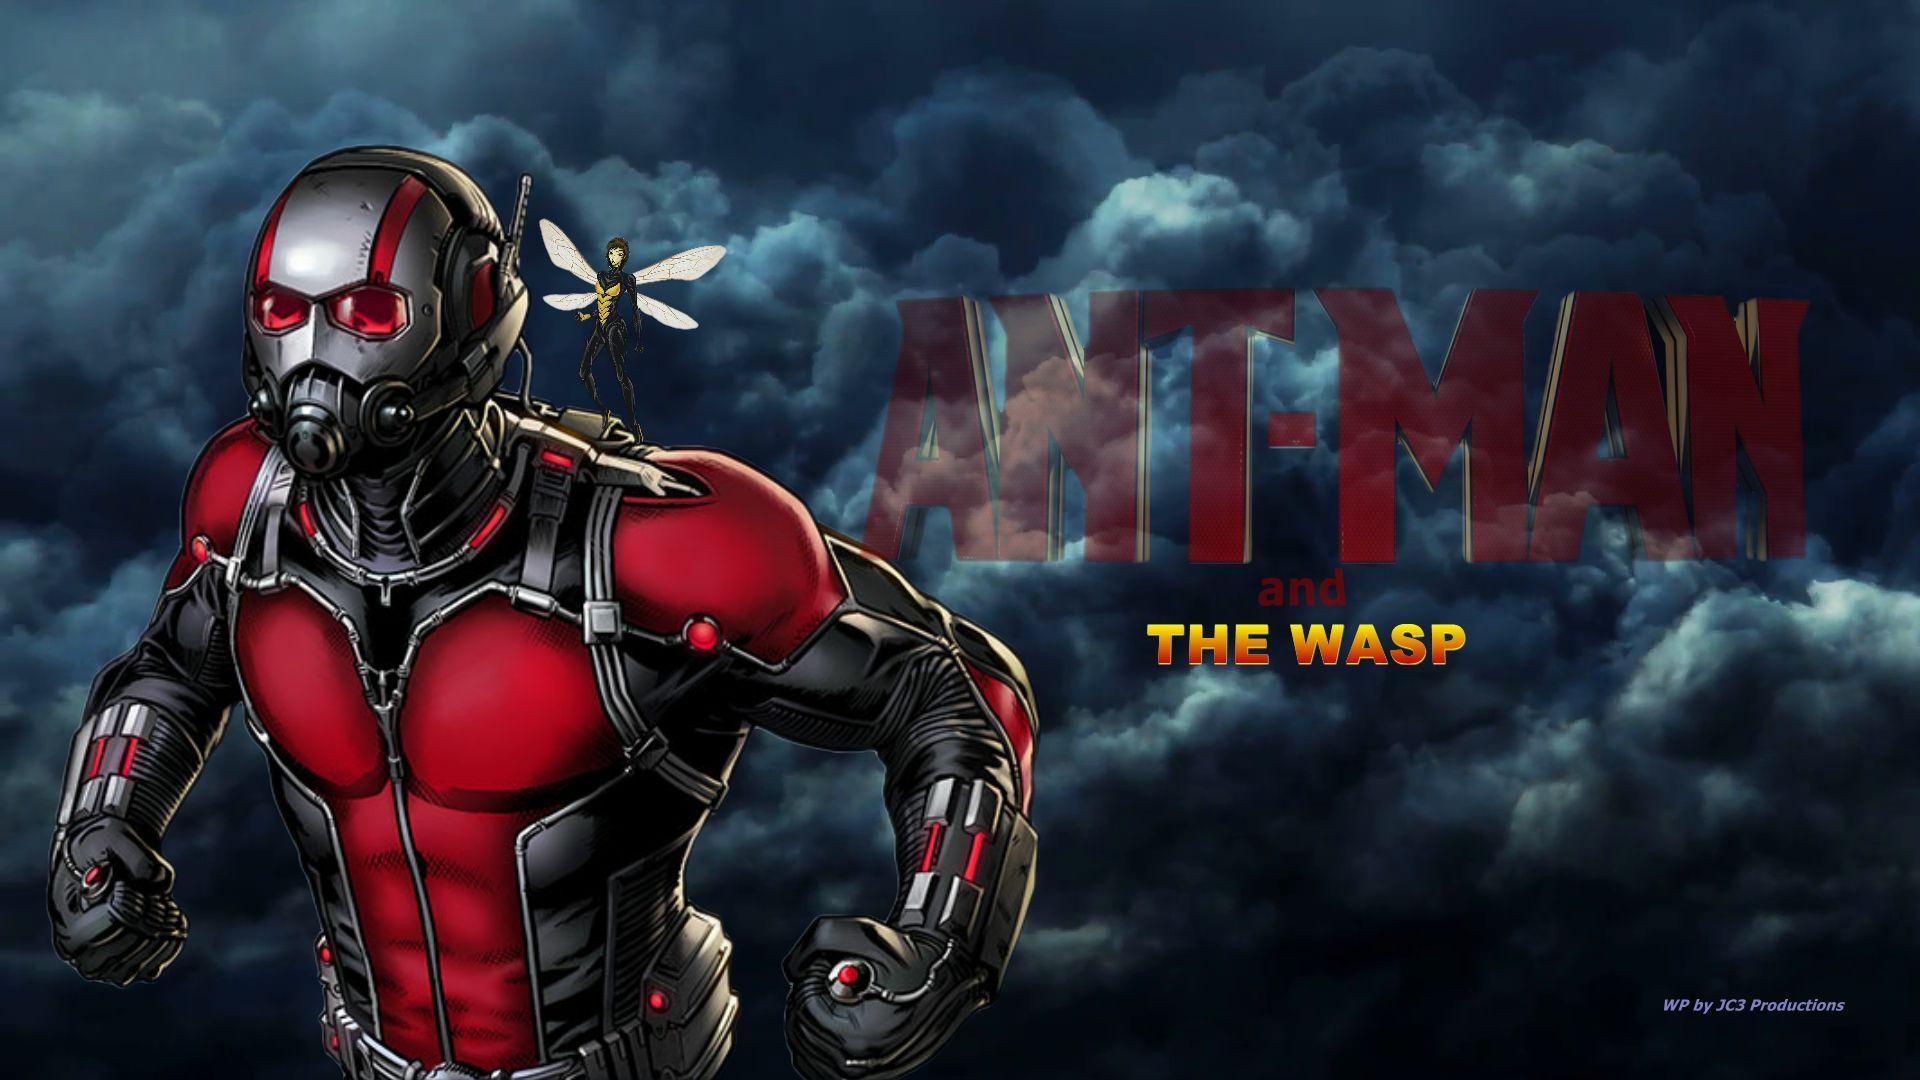 Ant Man And The Wasp Poster UHD 4K Wallpaper - Pixelz.cc